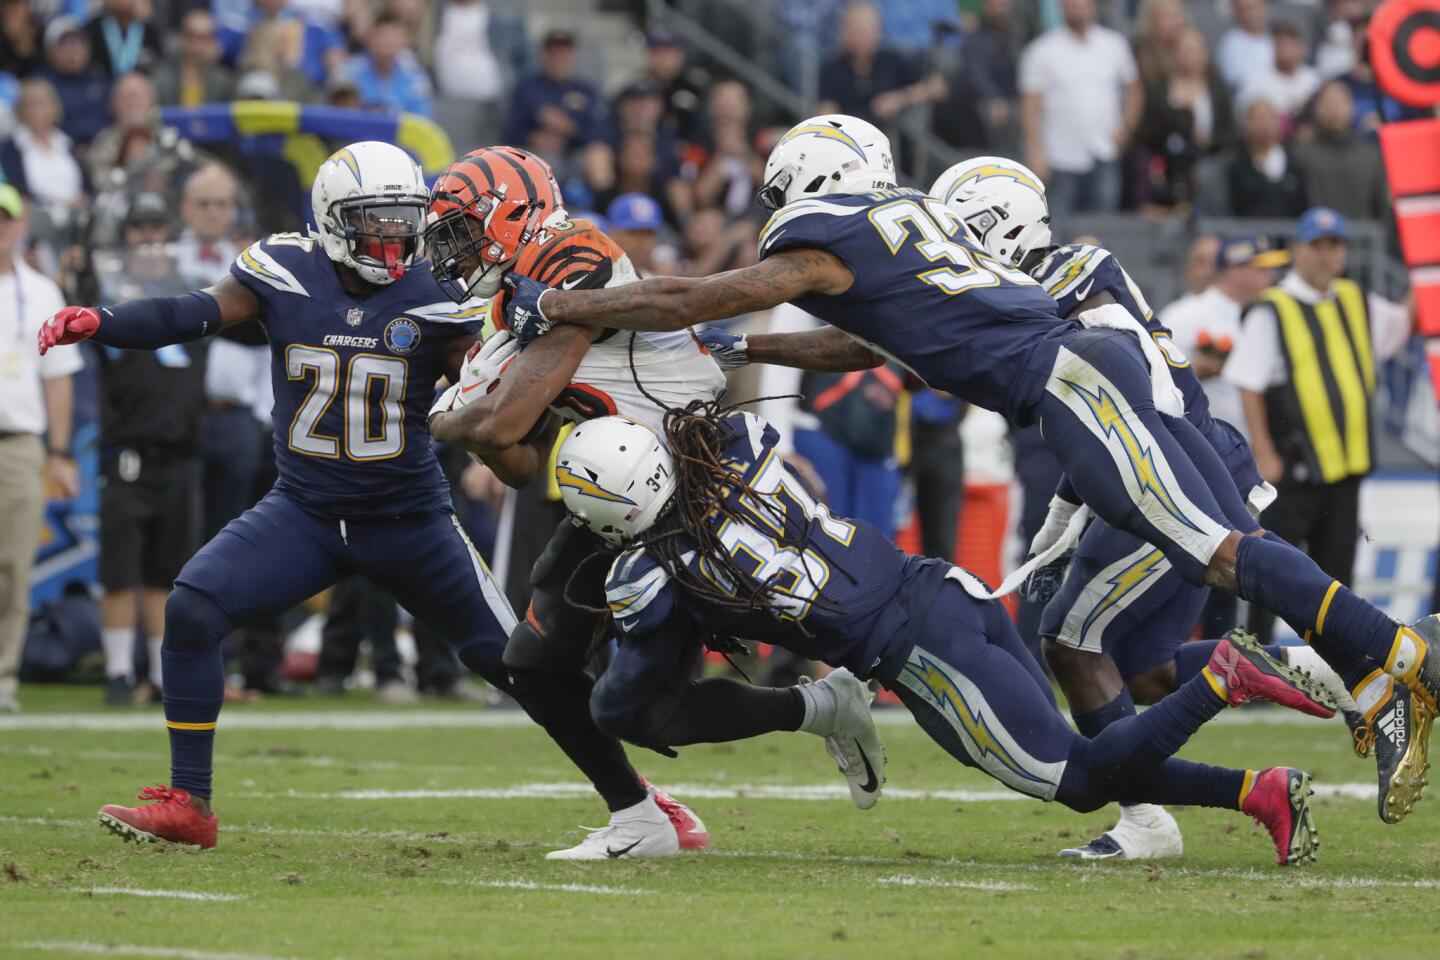 Bengals running back Joe Mixon drags Chargers defenders with him toward the first-down marker to prolong a drive in the fourth quarter.